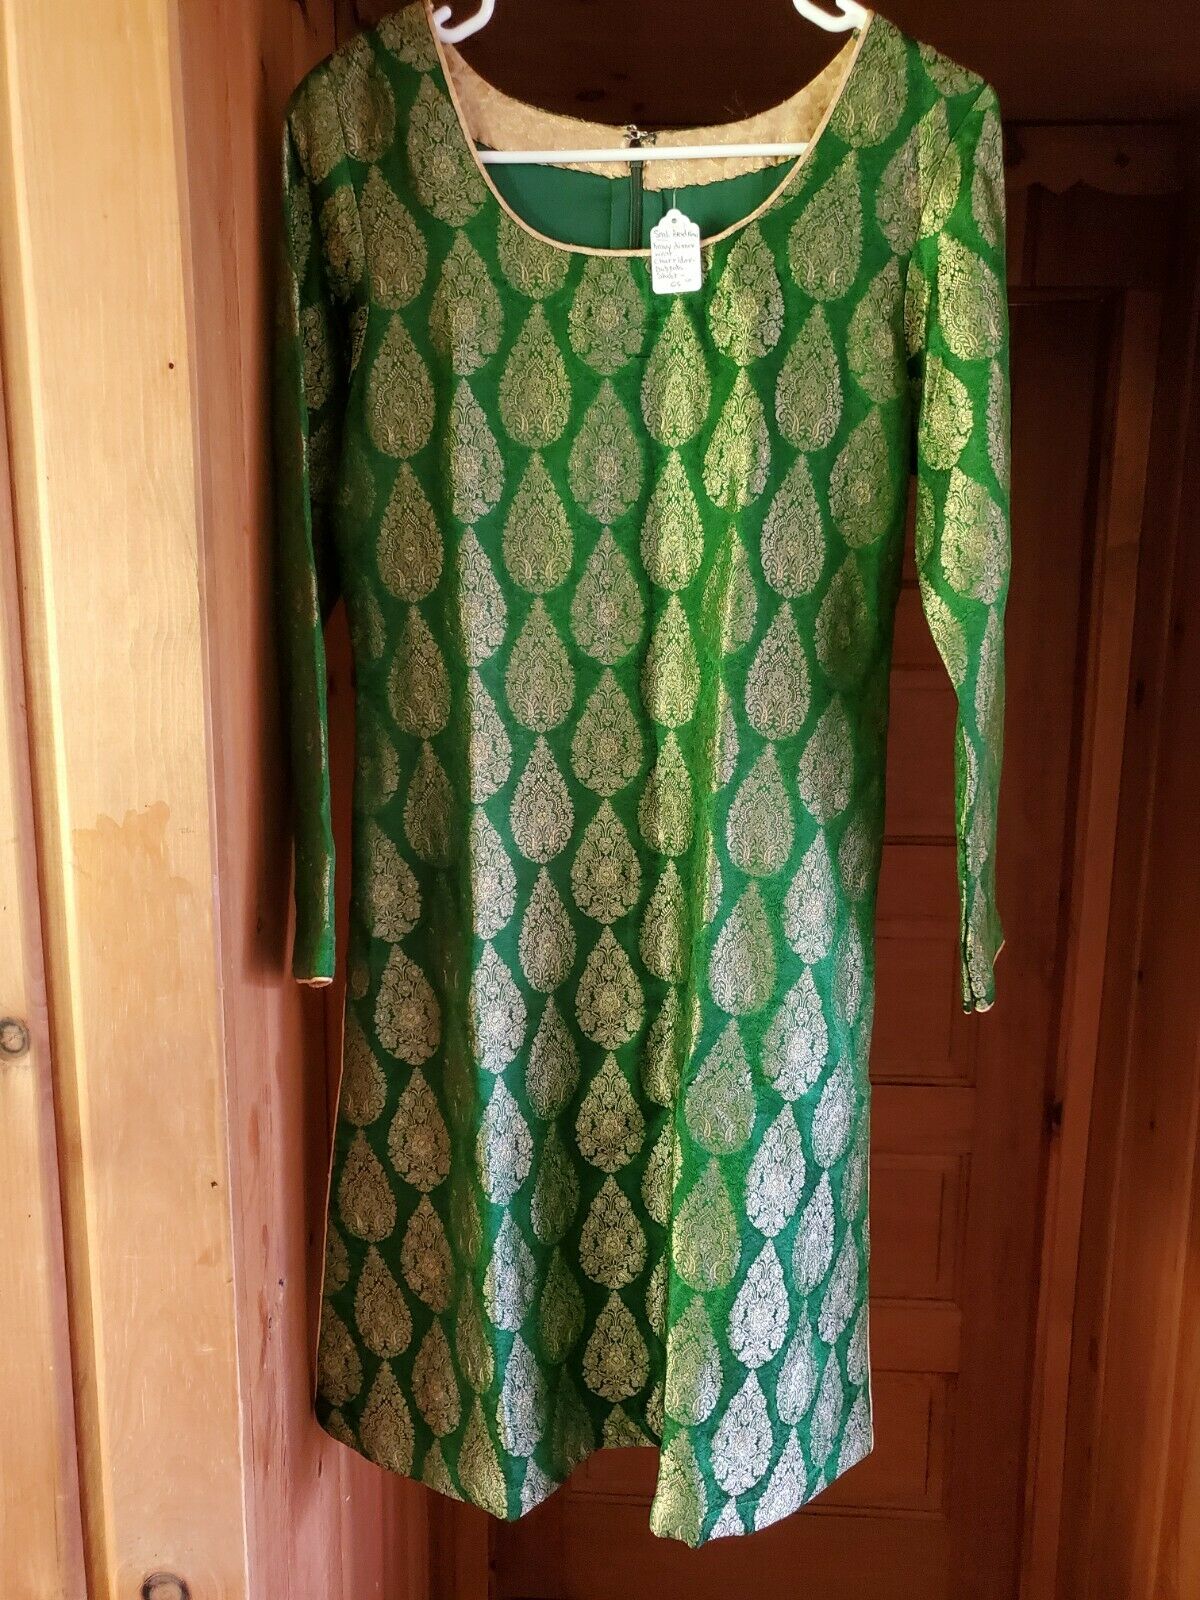 Salwar Kameez New Small Size Includes Dupata, Pants, And Top. Heavy Dinner Wear